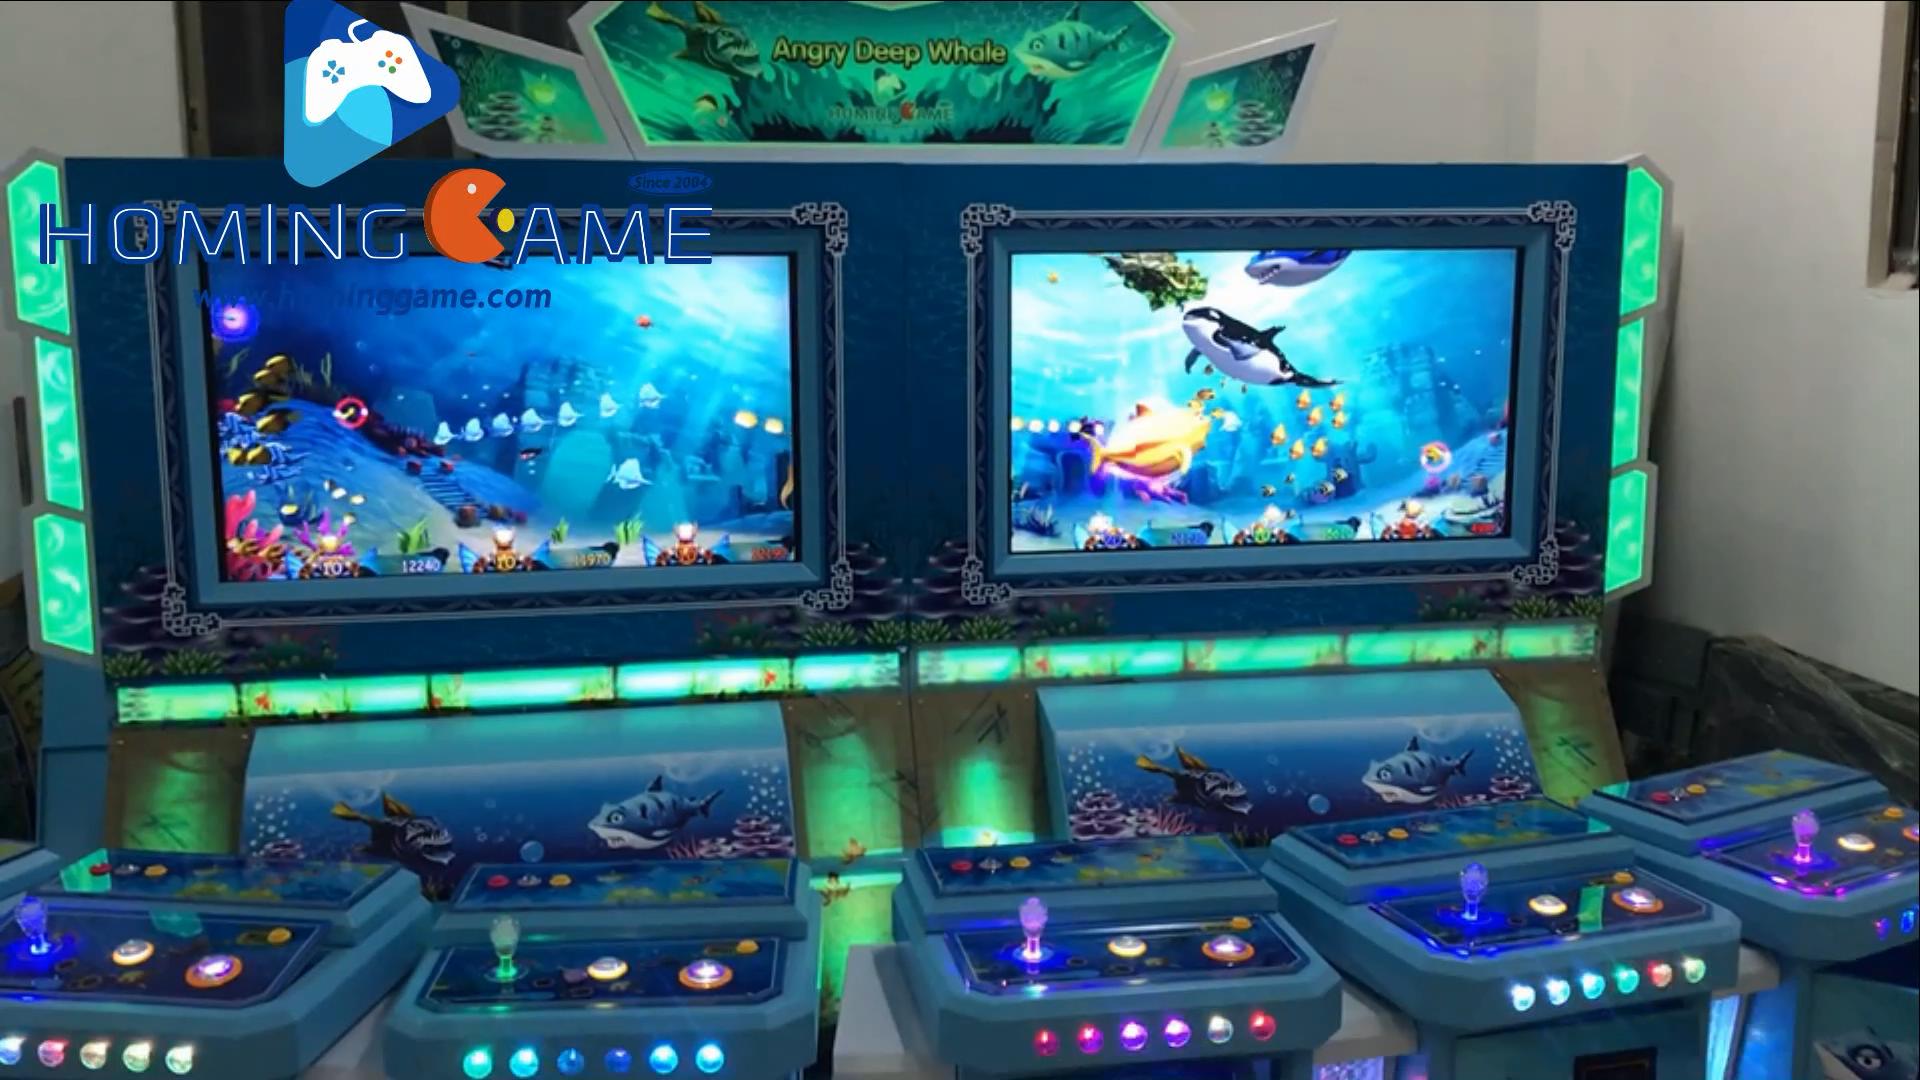 <br />
angry deep whale,angry deep whale fishing game machine,fishing game machine,fishing table game machine,fishing arcade game machine,fishing gaming machine,gaming machine,gambling machine,3D fishing game machine,3D kong fishing game machine,kong fishing game machine,wukong fishing game mahcine,ocean king fishing game machine,ocean monster fishing game machine,ocean king fishing game,ocean king 3 fishing game machine,ocean king 3 monster awaken fishing game machine,dragon hunter fishing game machine,dragon king fishing game machine,fish hunter fishng game machine,electrical gaming machine,indoor game machine,amusement park game equipment,game machine,arcade game machine,coin operated game machine,entertainment game machine,casino gaming machine,gambling,igs fishing game machine,hominggame,www.hominggame.com,gametube.hk,www.gametube.hk,Fishing Game Machine,Arcade Fishing Game Machine,The fishing-themed slot machines,Fishing slot machine,electronic amusement fishing game machine,fishing table game,master finish game screen,ocean star 2 fishing game,fishing amusement,amusement fishing game,amusement fishing game download,ishing game in china,fishing game amusement,fishing season arcade,fishing game coin operated,fish hunter,fish exper,hunting fish master,fish hunter game machine,fishing game,catch fish game machine,catching fish game machine,ocean star fishing game,arcade fishing game machine,fish season game machine,sea soul game machine,fish hunter plus medal game,arcade fishing game,fishing video table arcade game,fishing hunter coin machine,fish hunter plus game,blogspot fishhunter plus,arcade fishing games,beat fish hunter plus arcade,fish hunter arcade game,how to play 